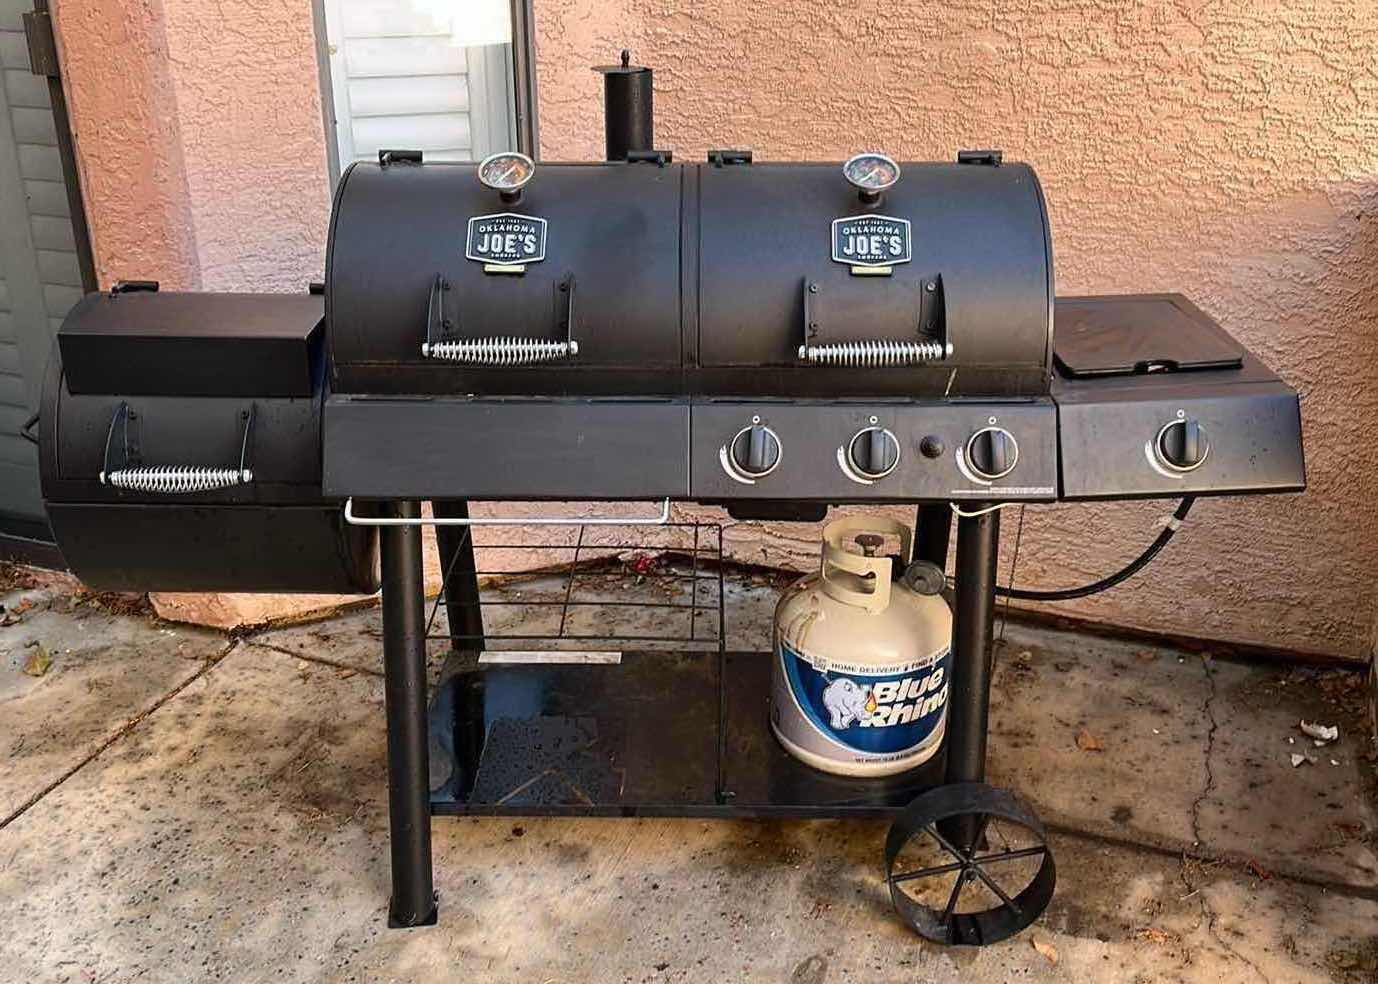 Photo 1 of OKLAHOMA JOE’S SMOKERS BLACK LONGHORN COMBO 3 BURNER CHARCOAL & PROPANE GAS SMOKER BBQ GRILL MODEL 15202029 1,060sq.in. COOKING SPACE W COVER, BLUE RHINO 15LB PROPANE TANK & GRILLING ACCESSORIES (READ NOTES)